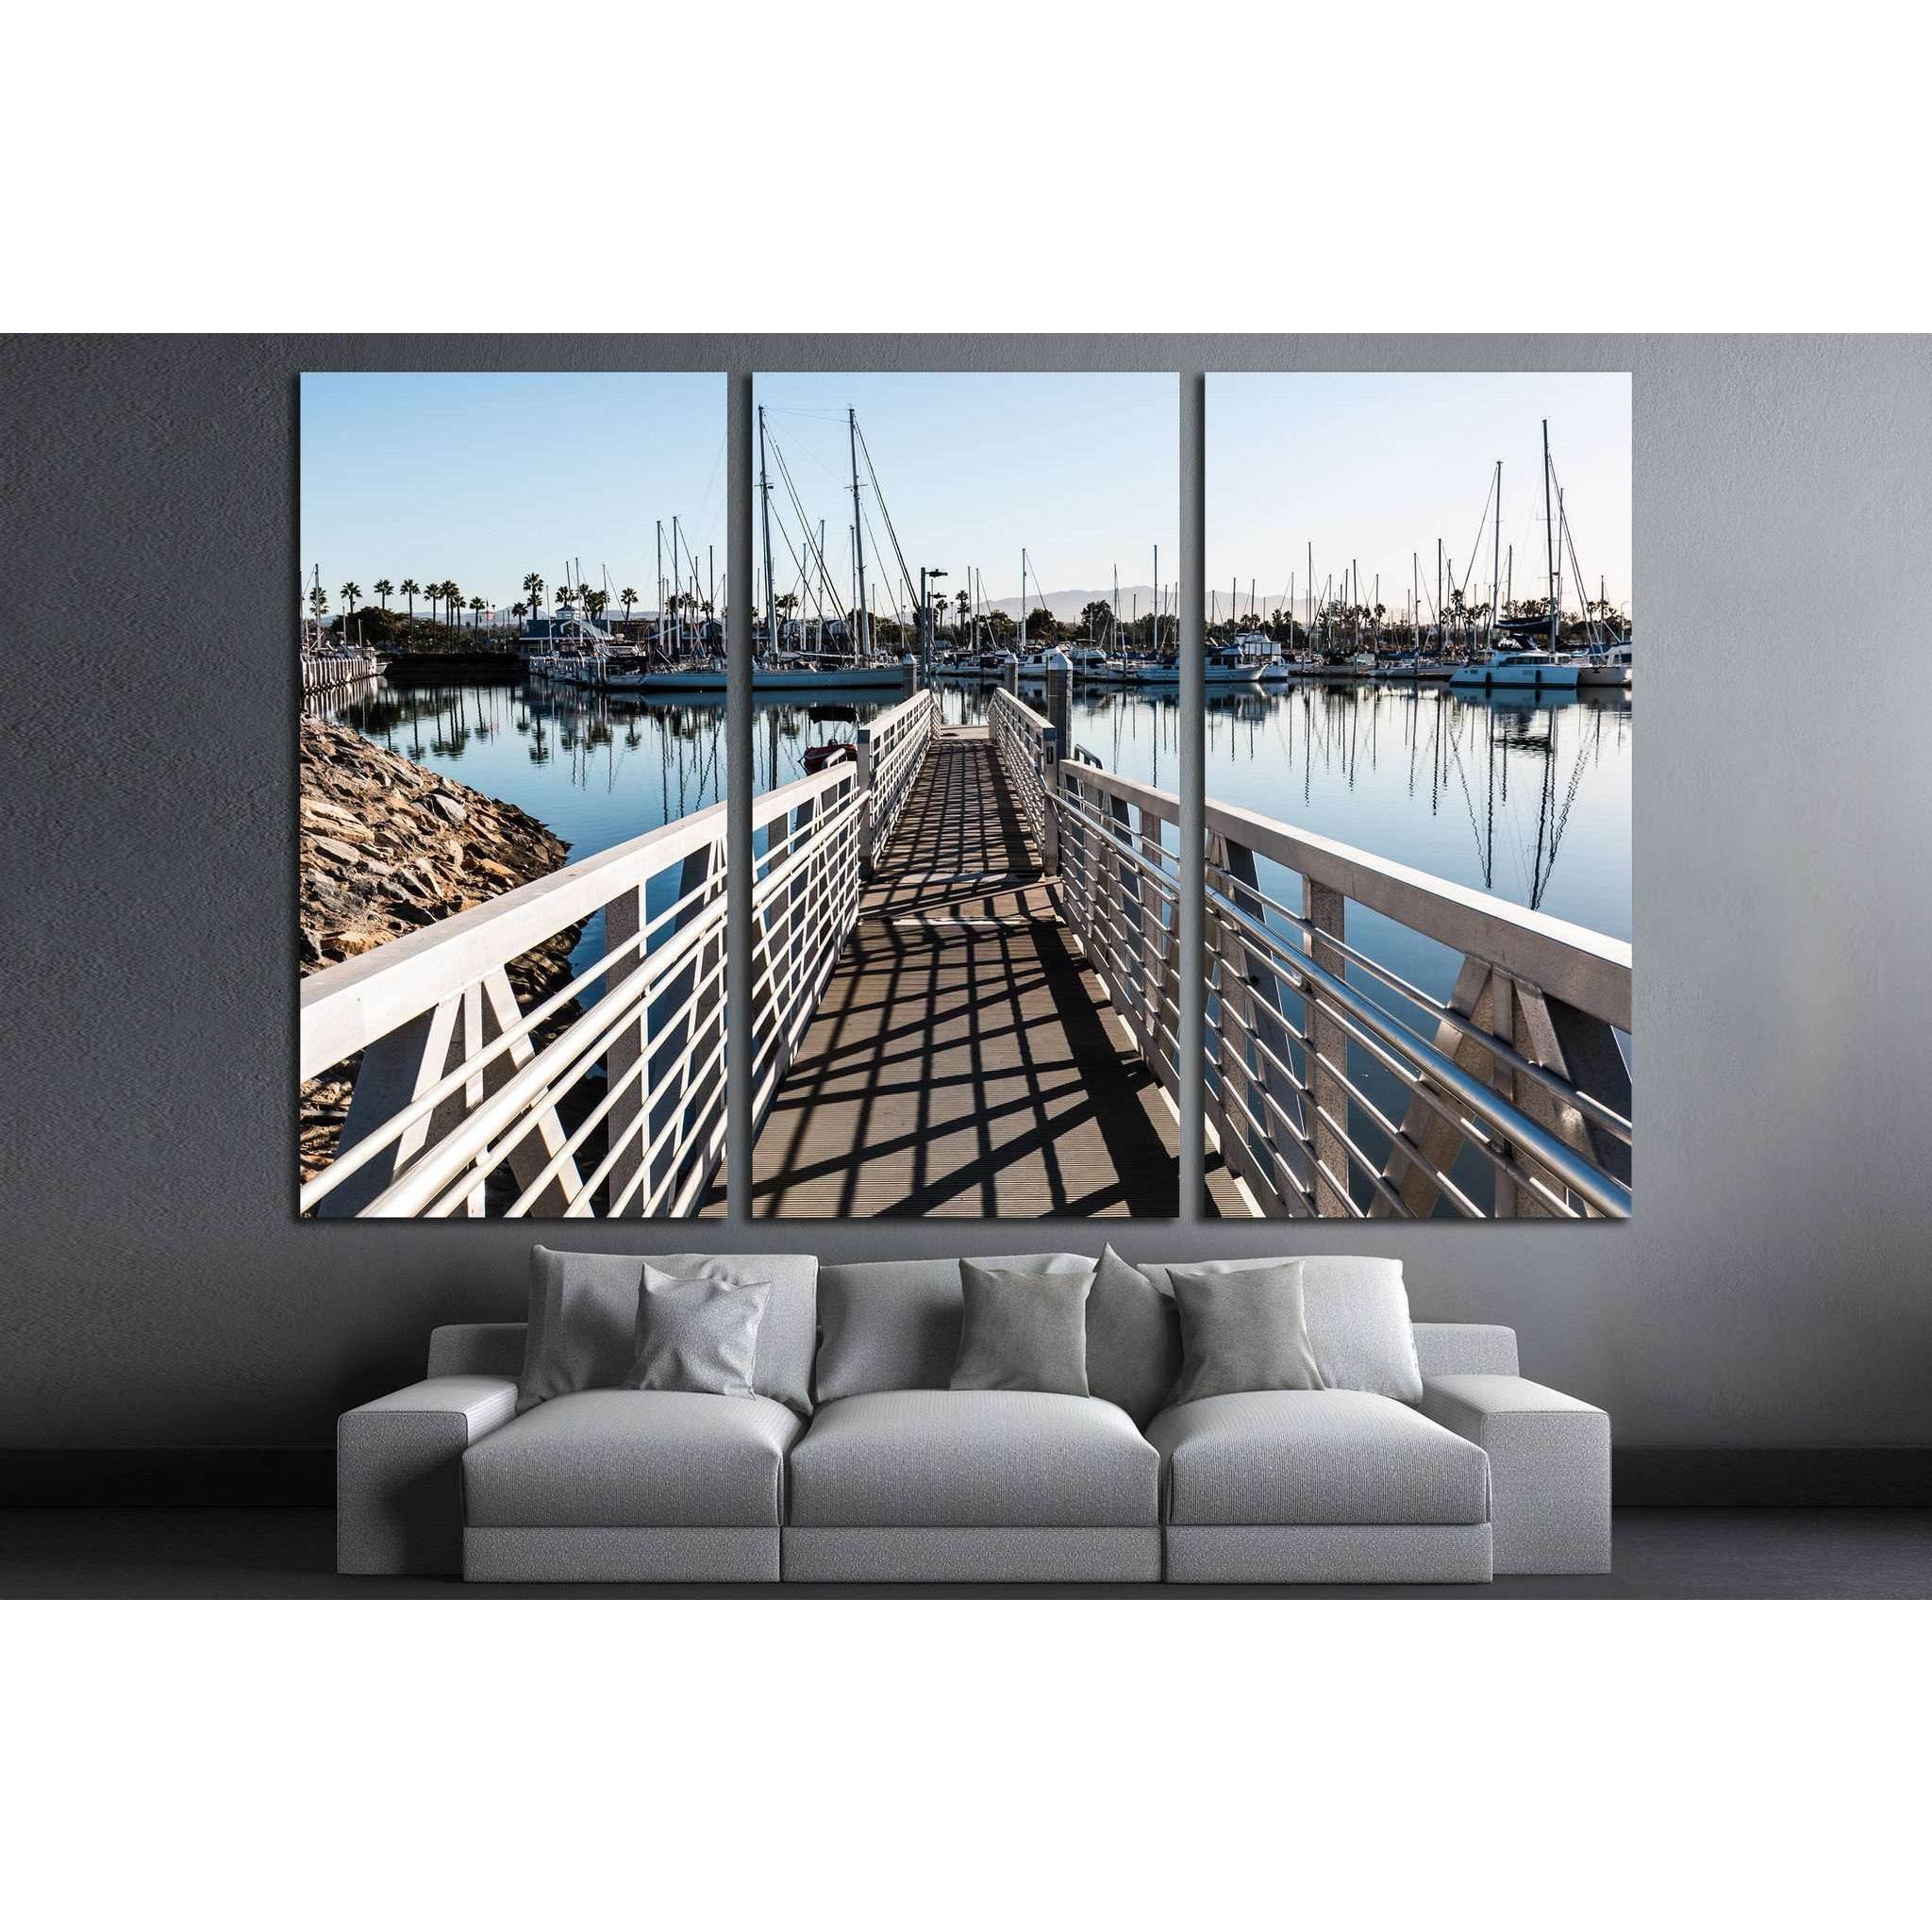 Chula Vista Bayfront park boat launch ramp with boats moored in marina №2105 Ready to Hang Canvas Print